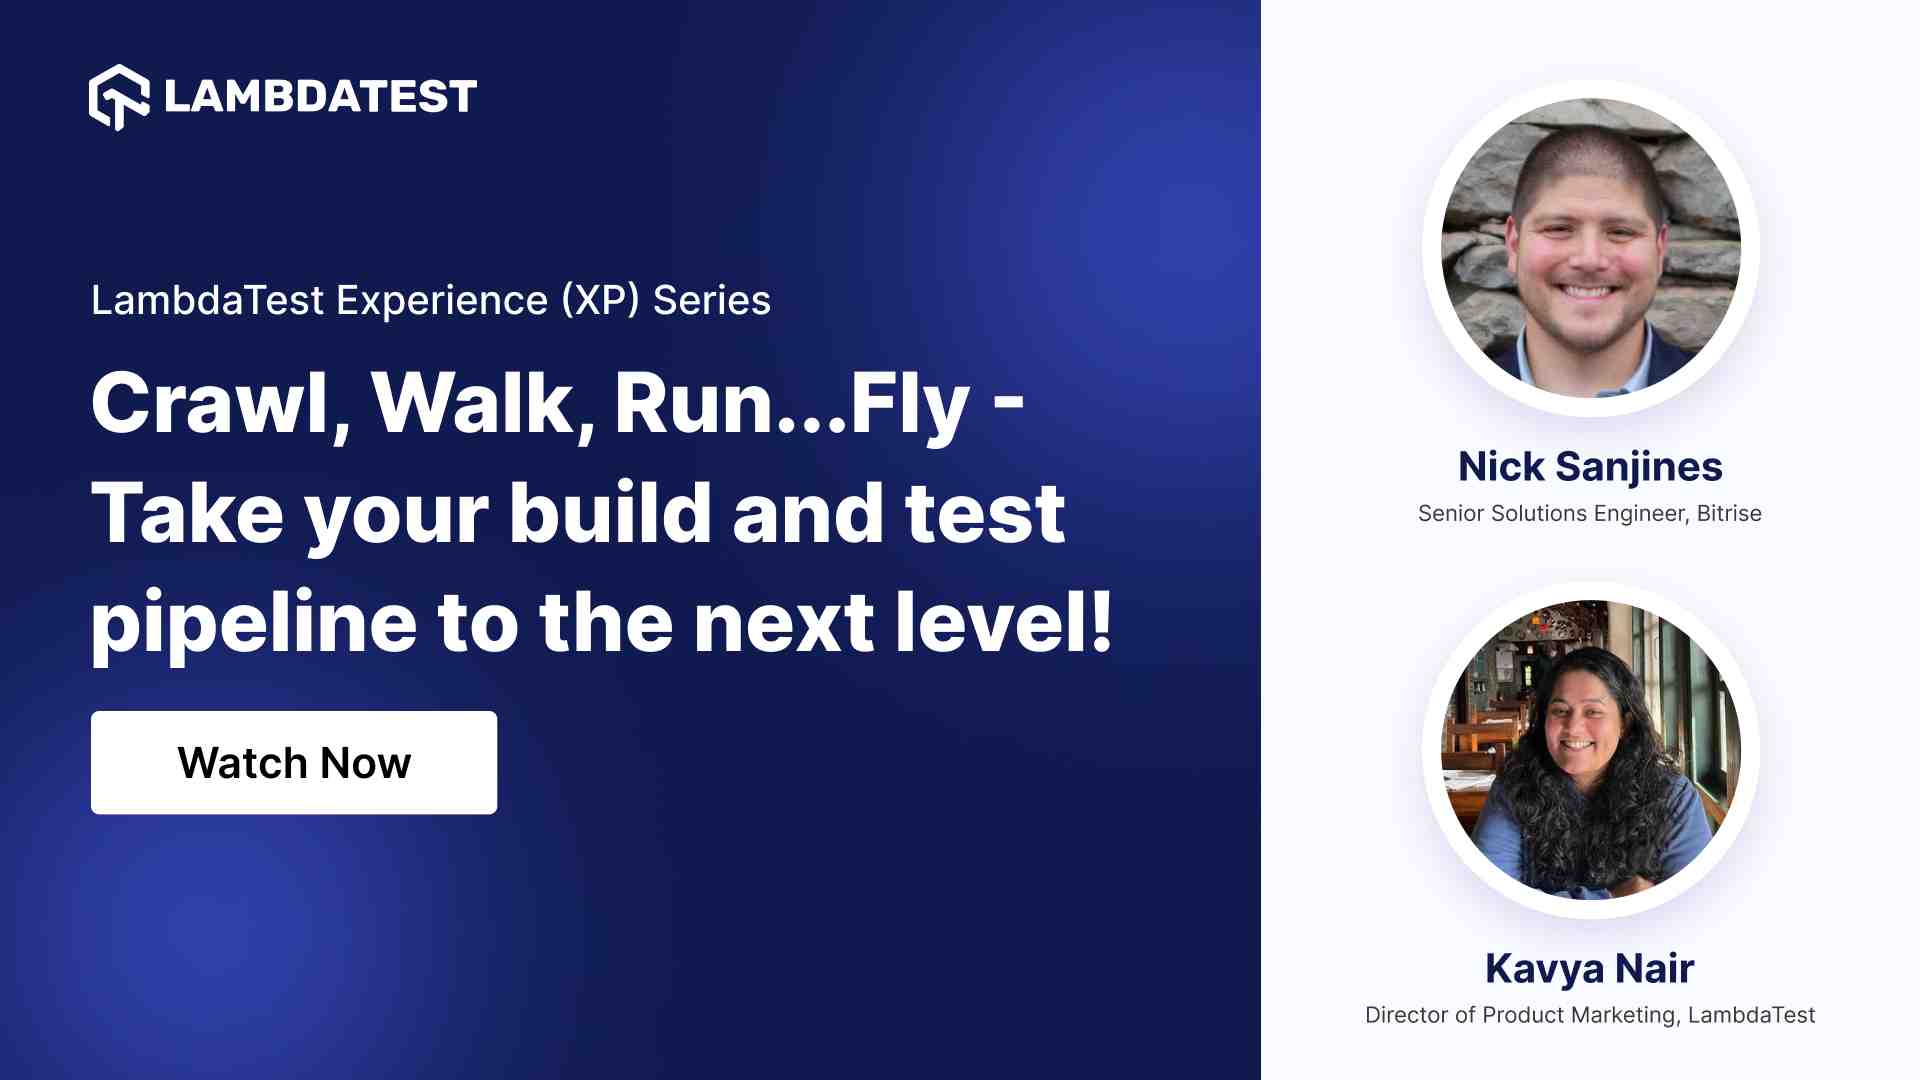 Crawl, Walk, Run...Fly - Take your build and test pipeline to the next level!